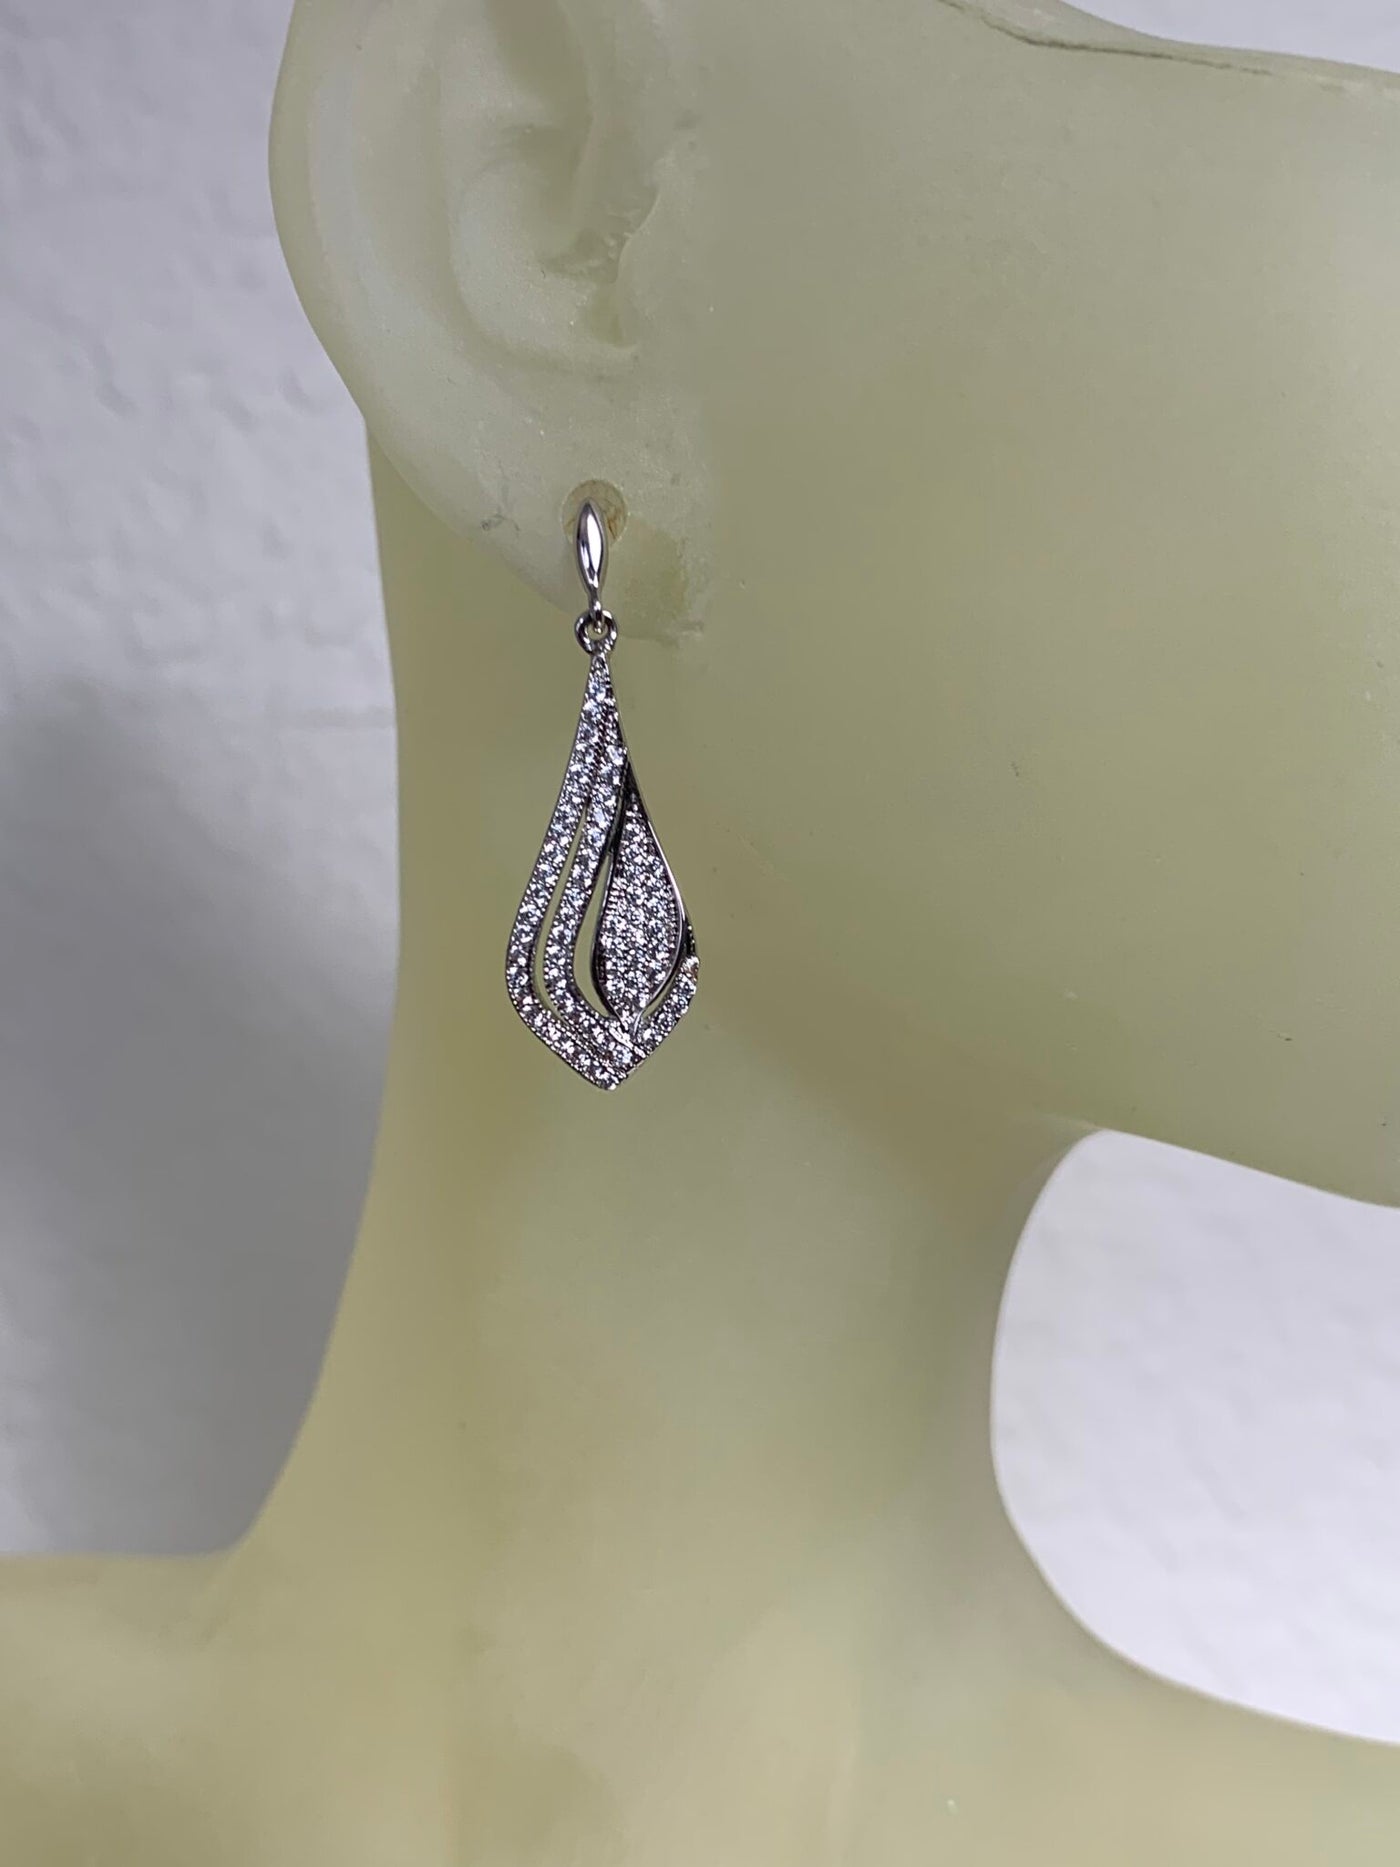 Silver Tone Dangling Earrings Decorated with Pave Set Cubic Zirconia